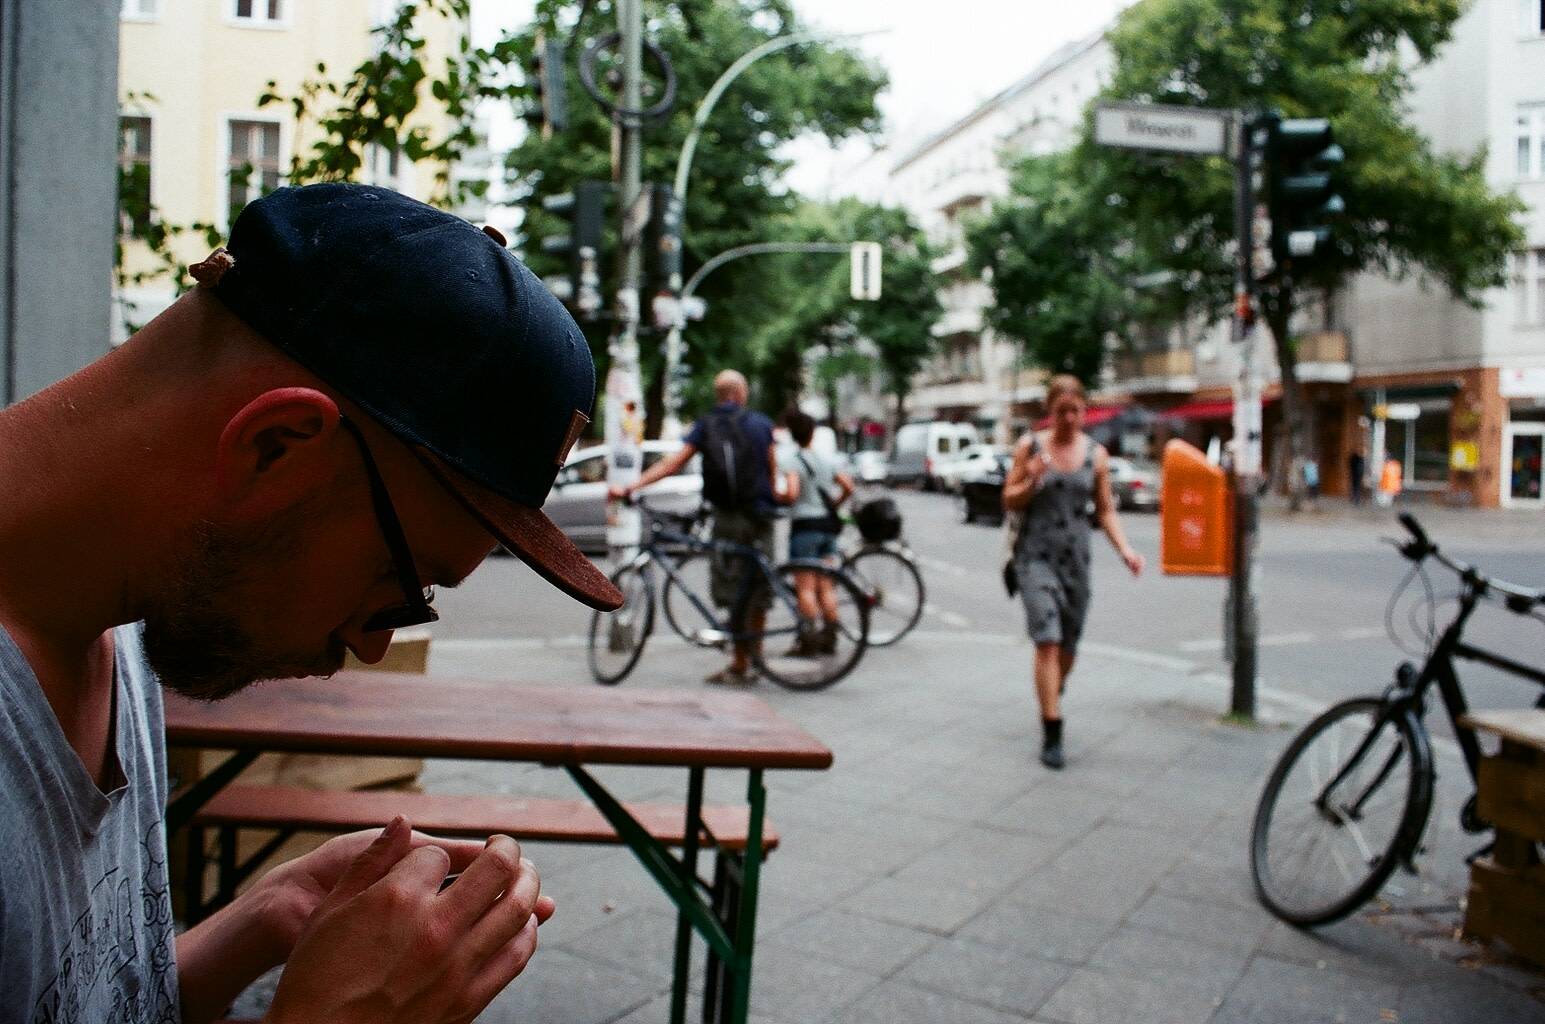 a man sitting by the benches on the sidewalk of a busy street, looking at his phone